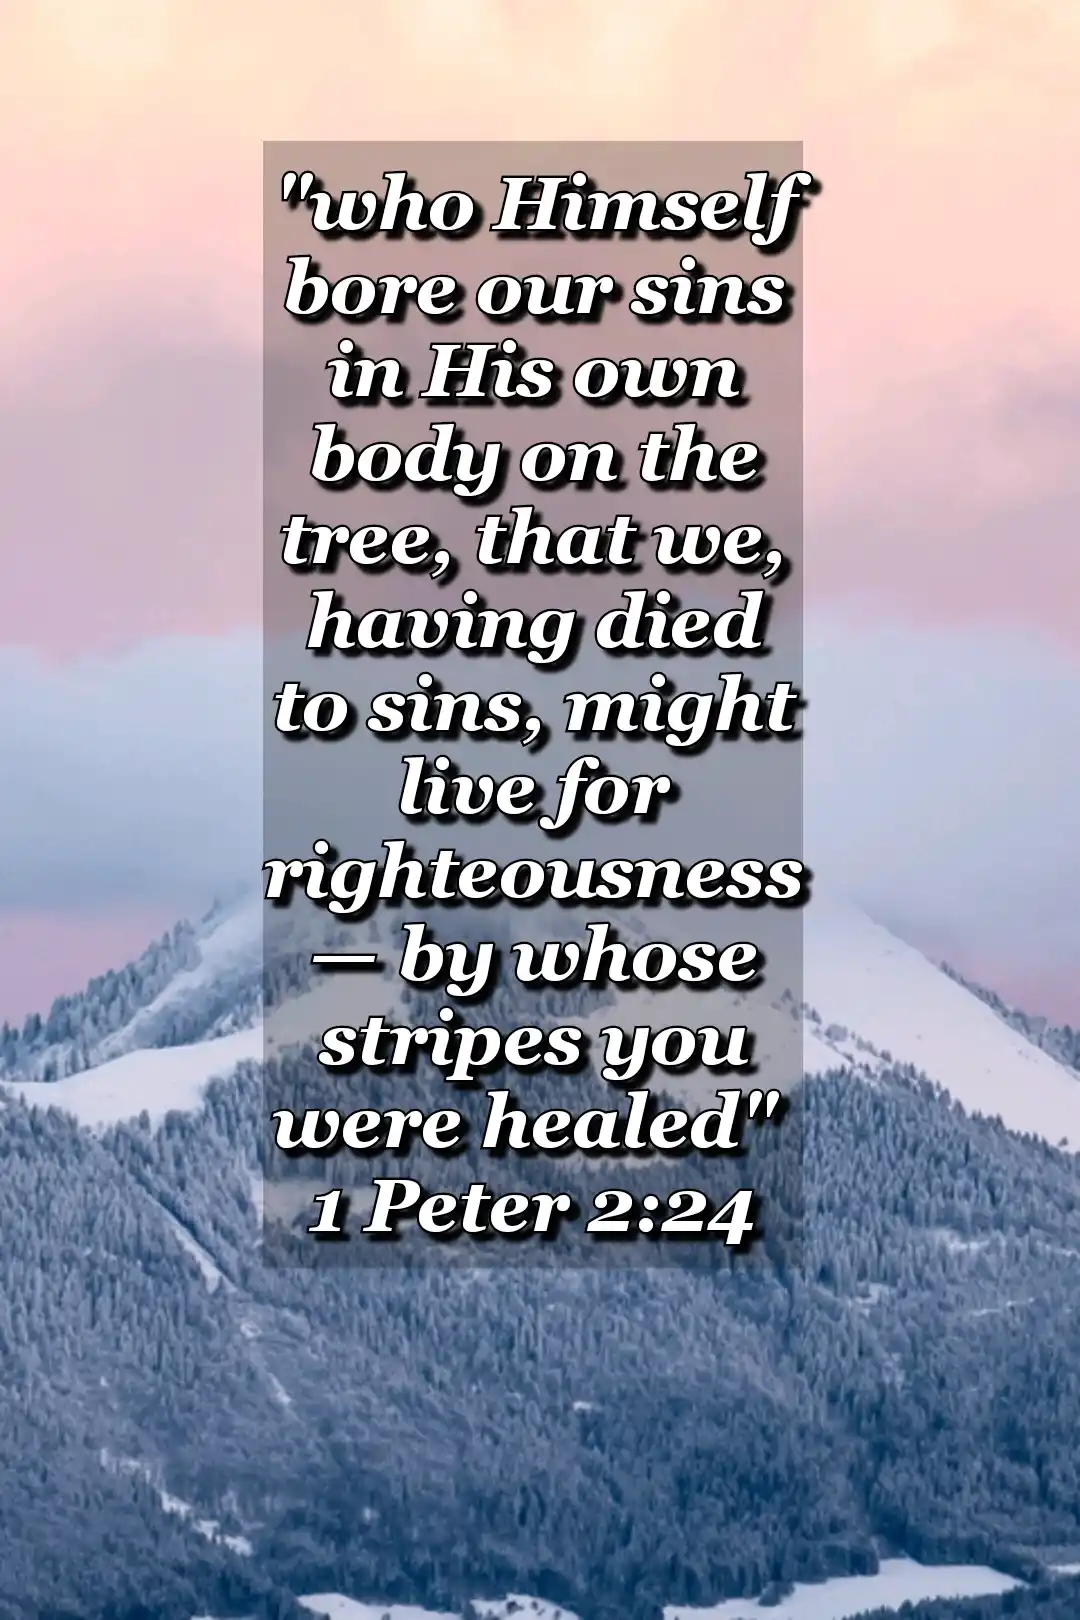 Bible-Verses_about_death-Image (1 Peter 2:24)